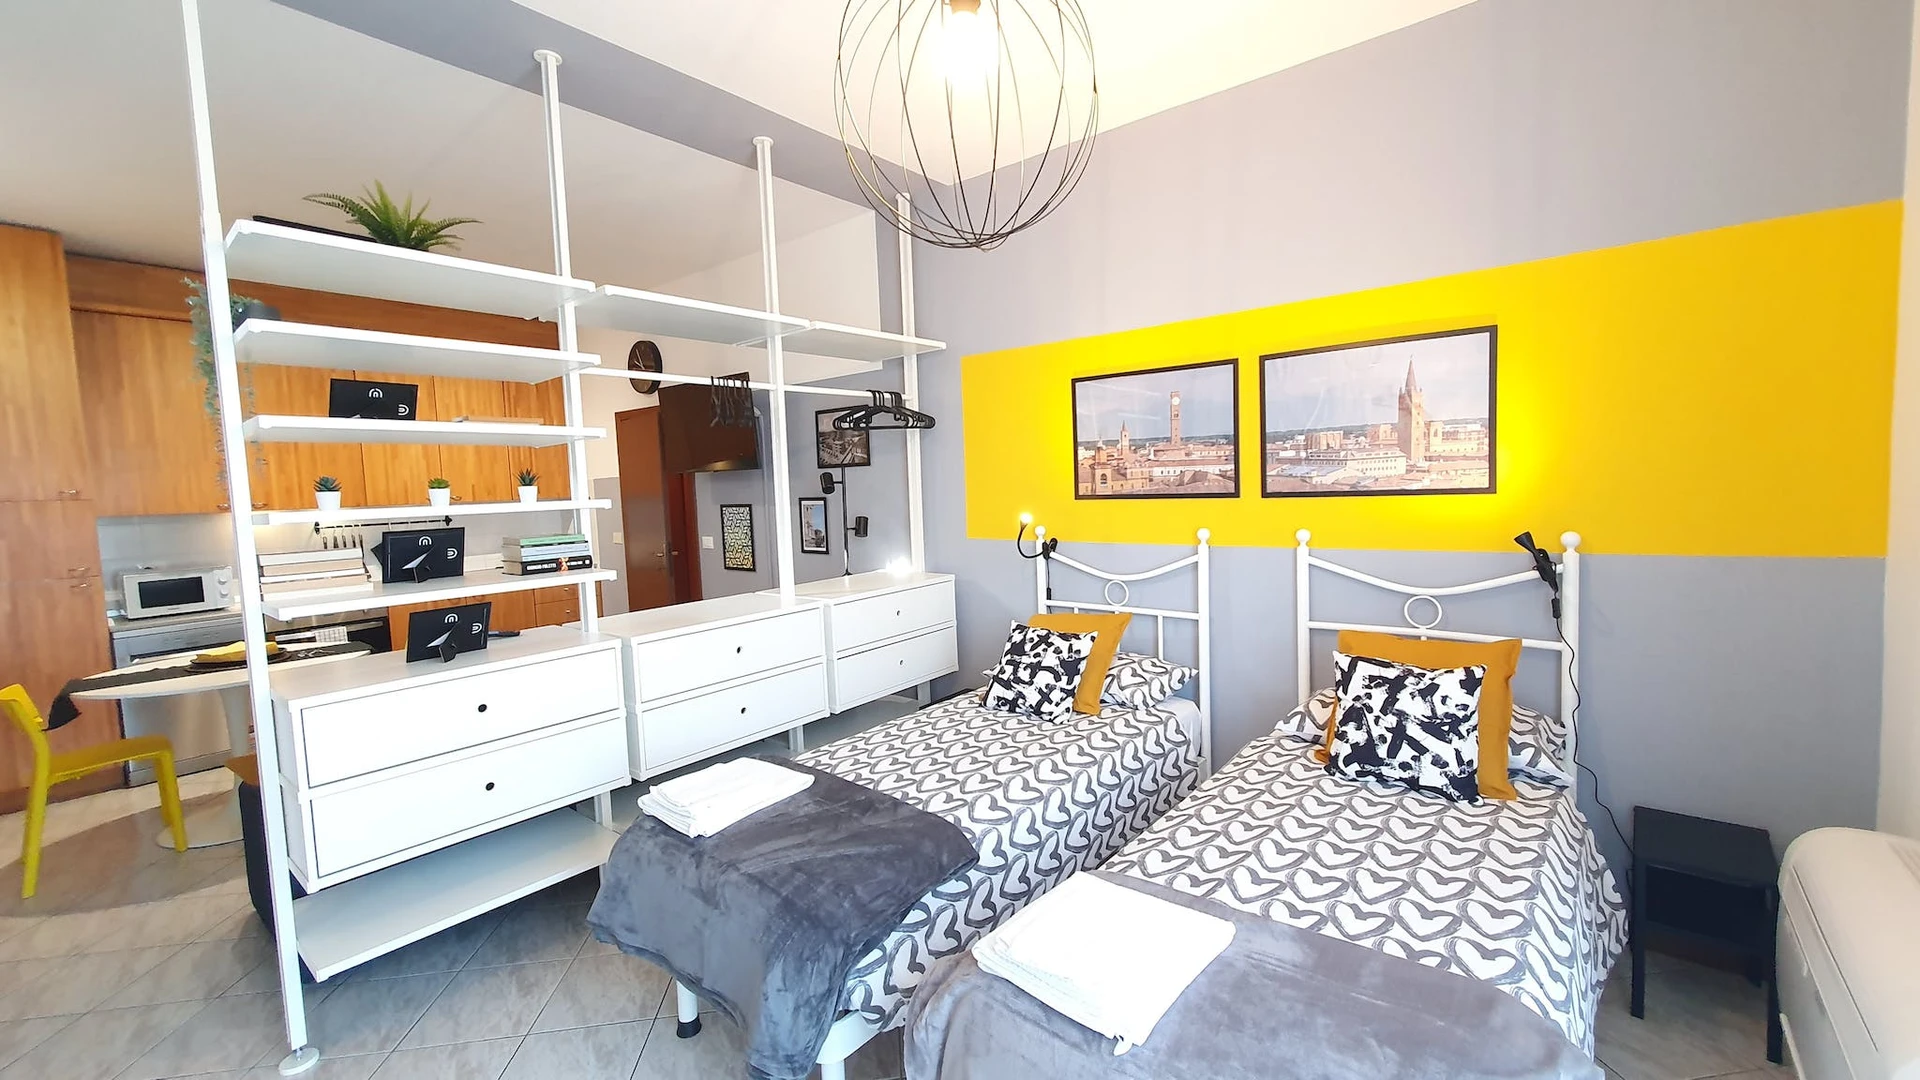 Two bedroom accommodation in Forlì